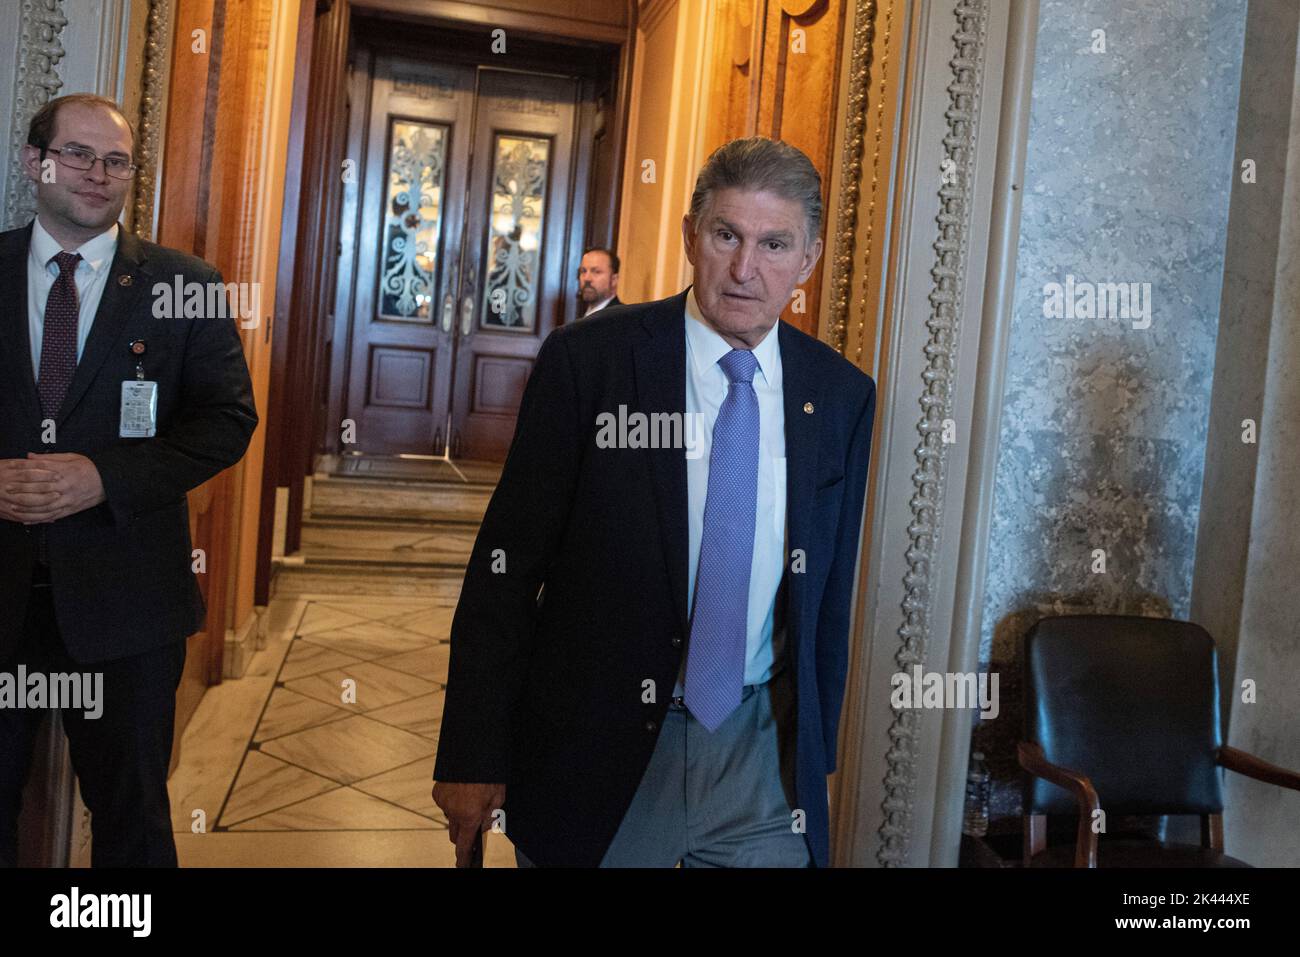 United States Senator Joe Manchin III (Democrat of West Virginia), exits the US Senate Chamber after voting on the a Continuing Resolution which, if passed, will fund the US government from October 1 through December 16, in the US Capitol in Washington, DC, Thursday, September 29, 2022. Credit: Cliff Owen/CNP Stock Photo